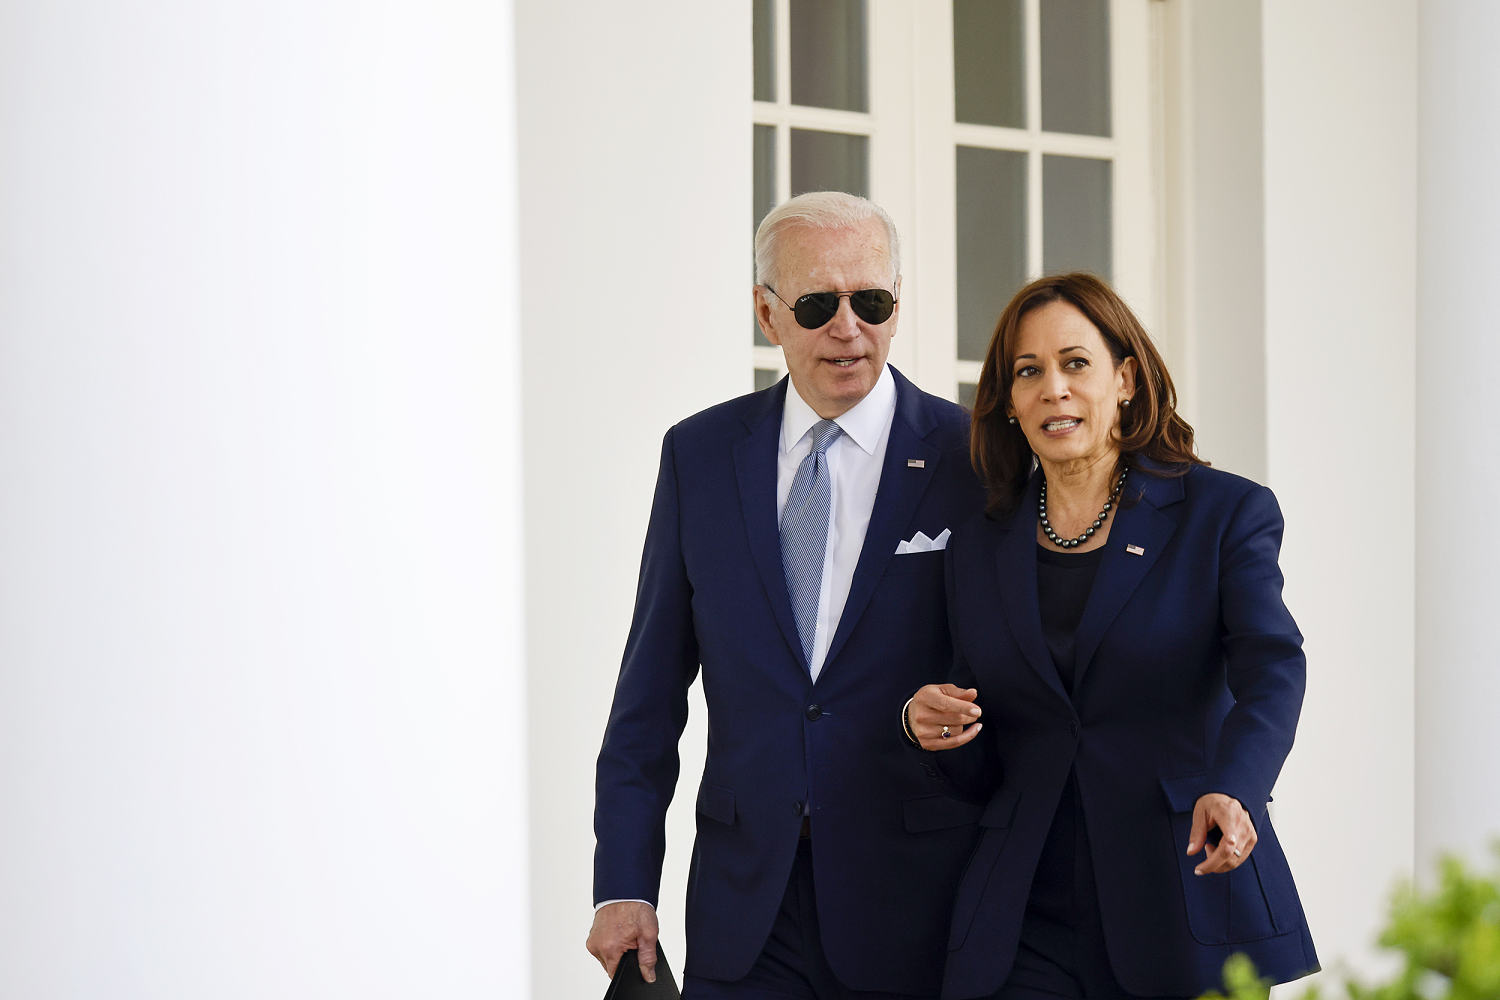 How the Biden campaign quickly mobilized on Trump's abortion stance